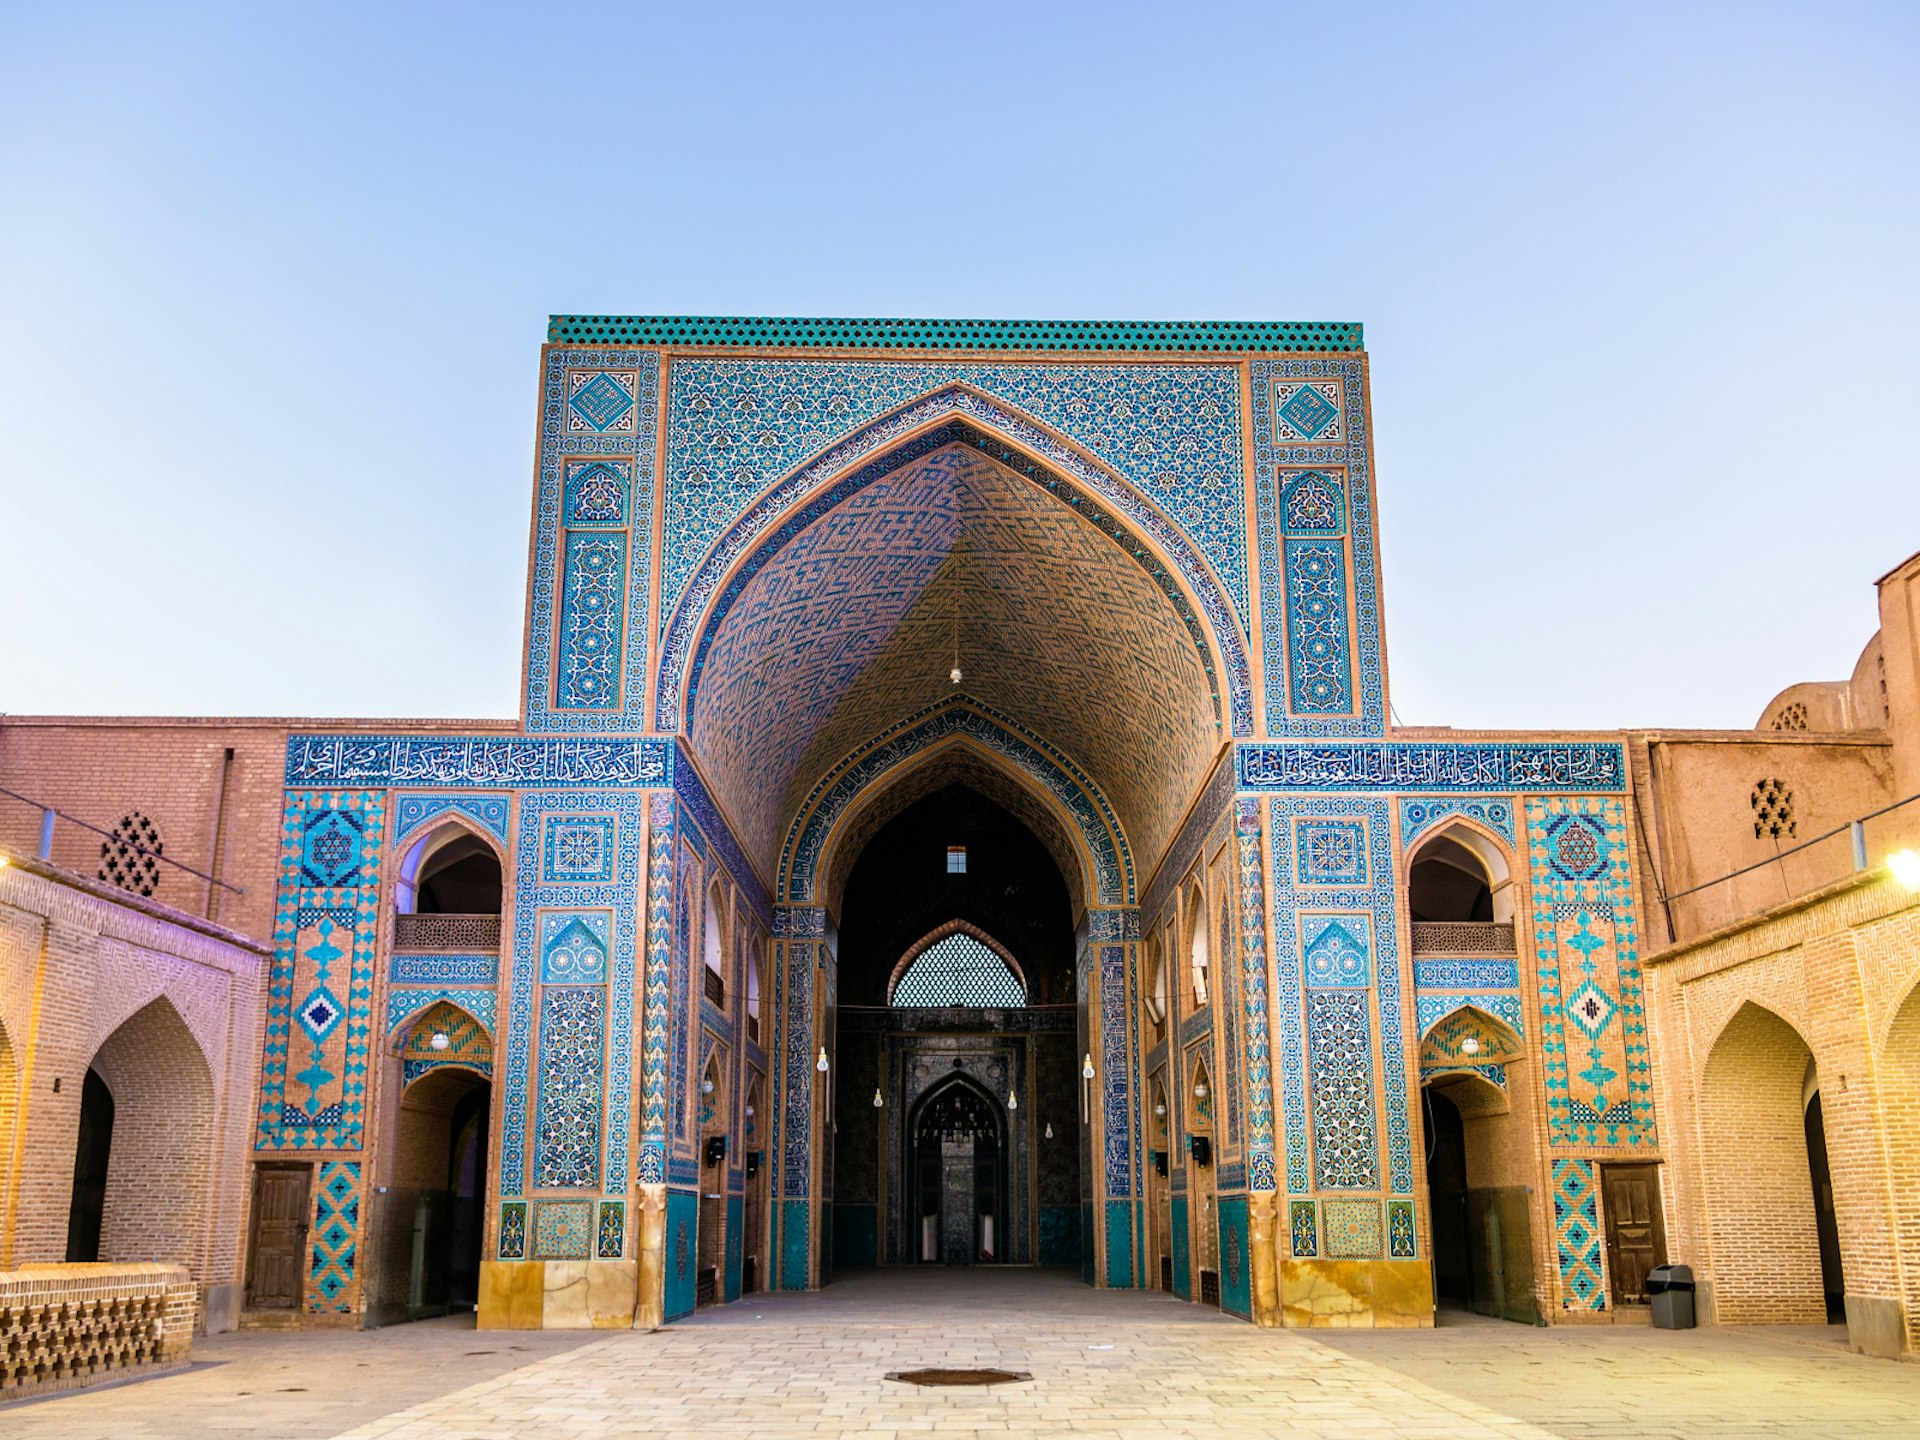 Courtyard of a mosque in the Iranian city of Yazd. The building is covered in intricate tile patters, predominantly shades of blue with some yellow